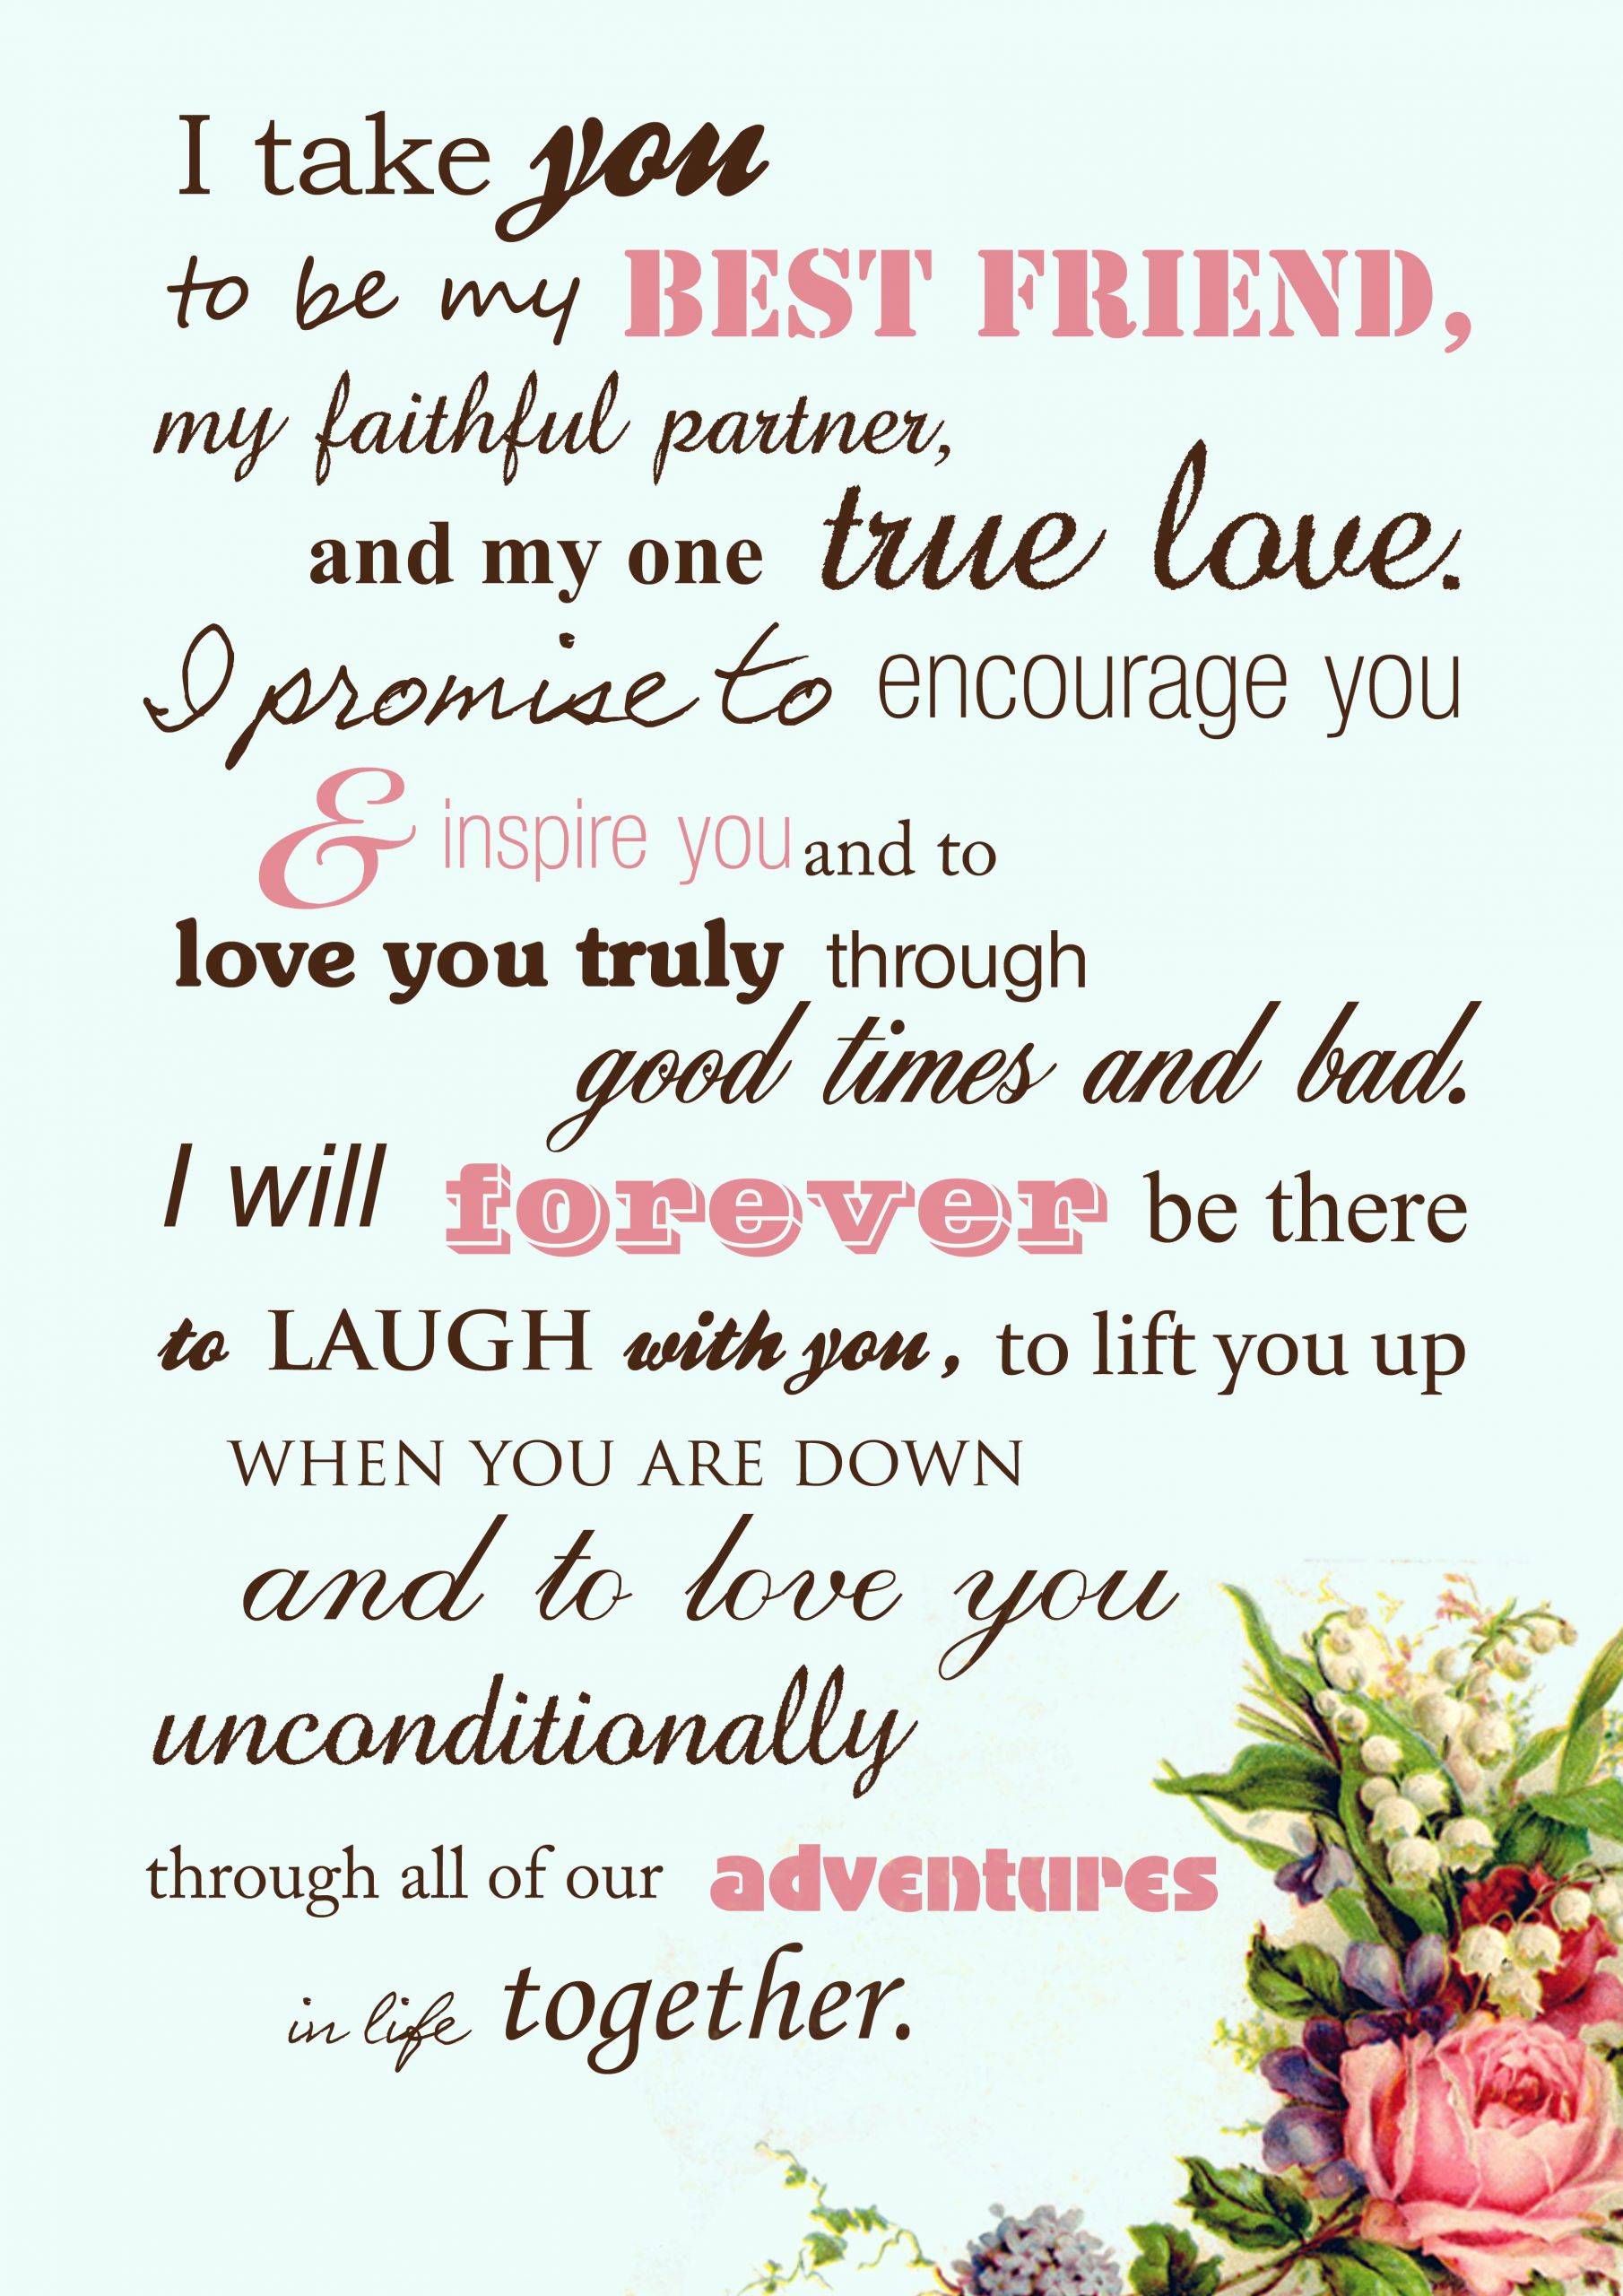 Wedding Vows Original
 Beautiful wedding vows instead of the traditional by the